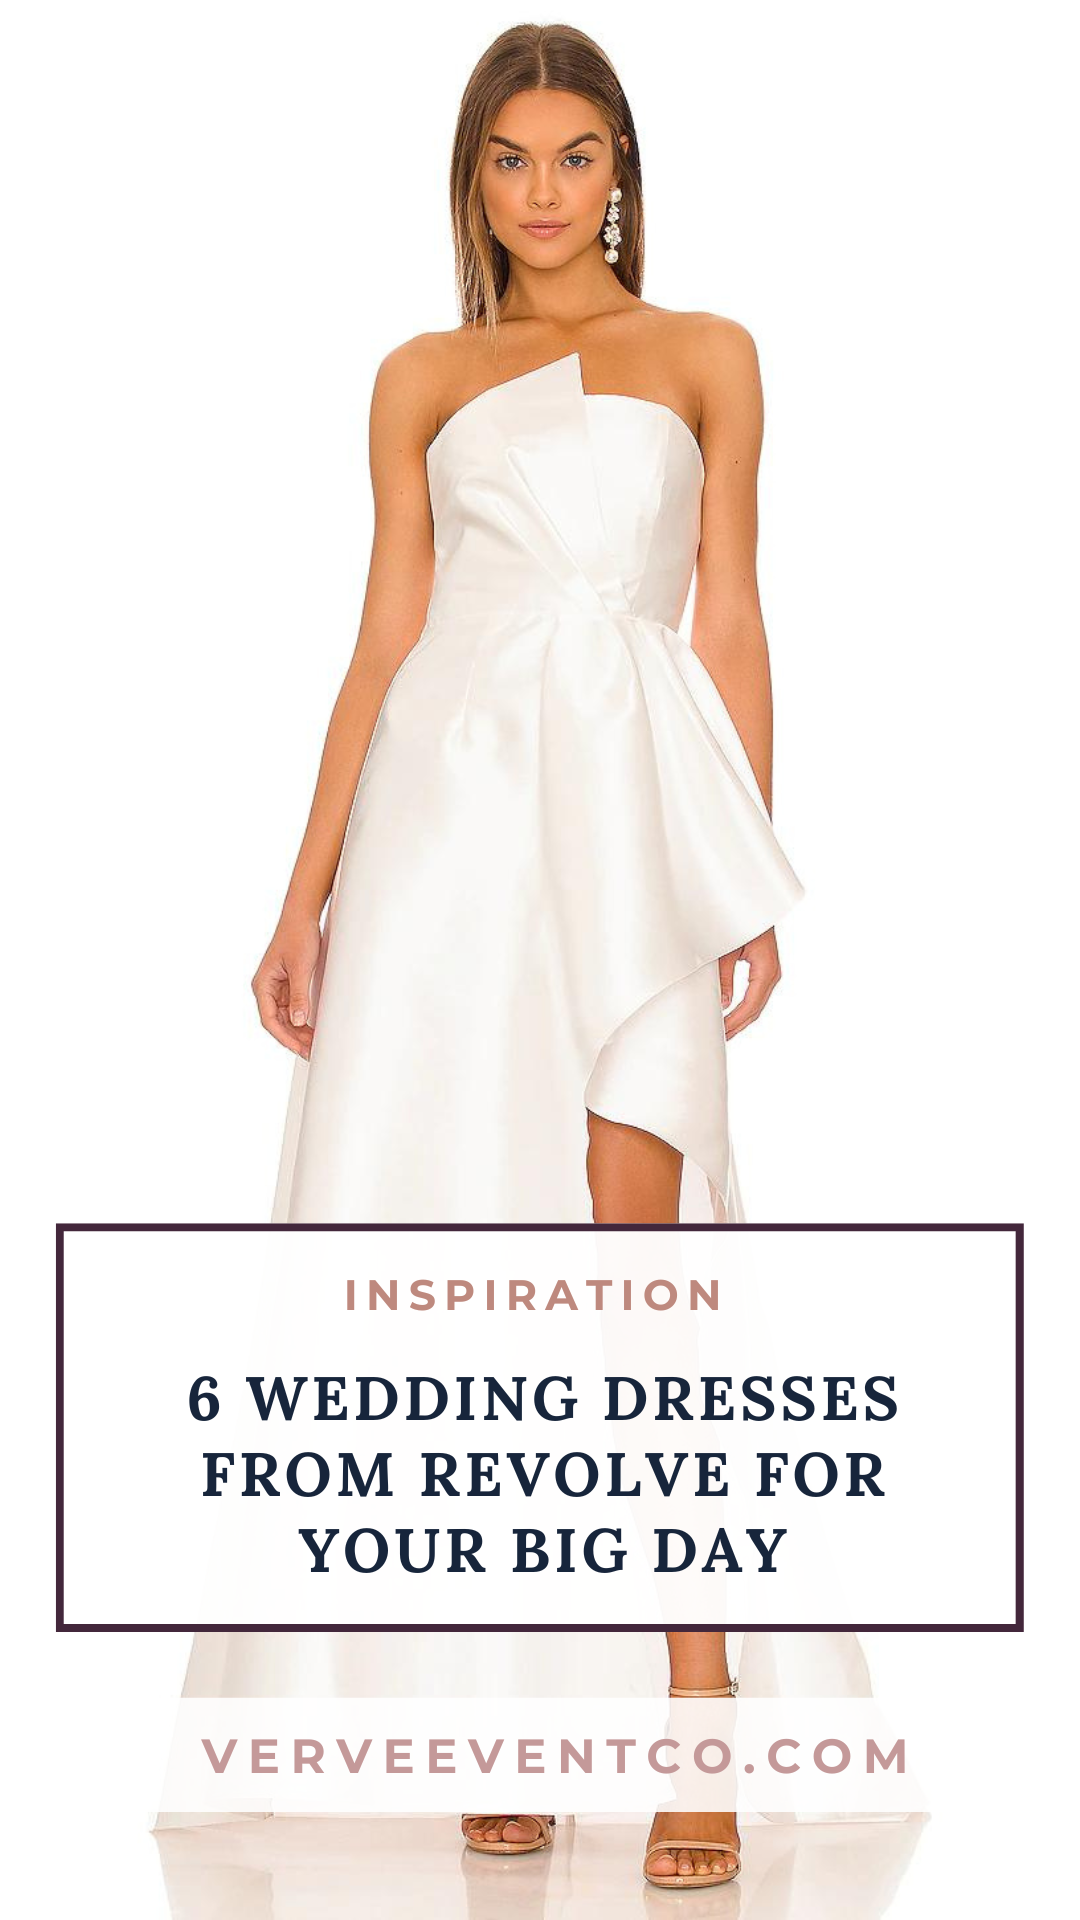 ATTACHMENT DETAILS 6-Wedding-Dress-from-Revolve-for-Your-Big-Day_Verve-Event-Co..png February 13, 2023